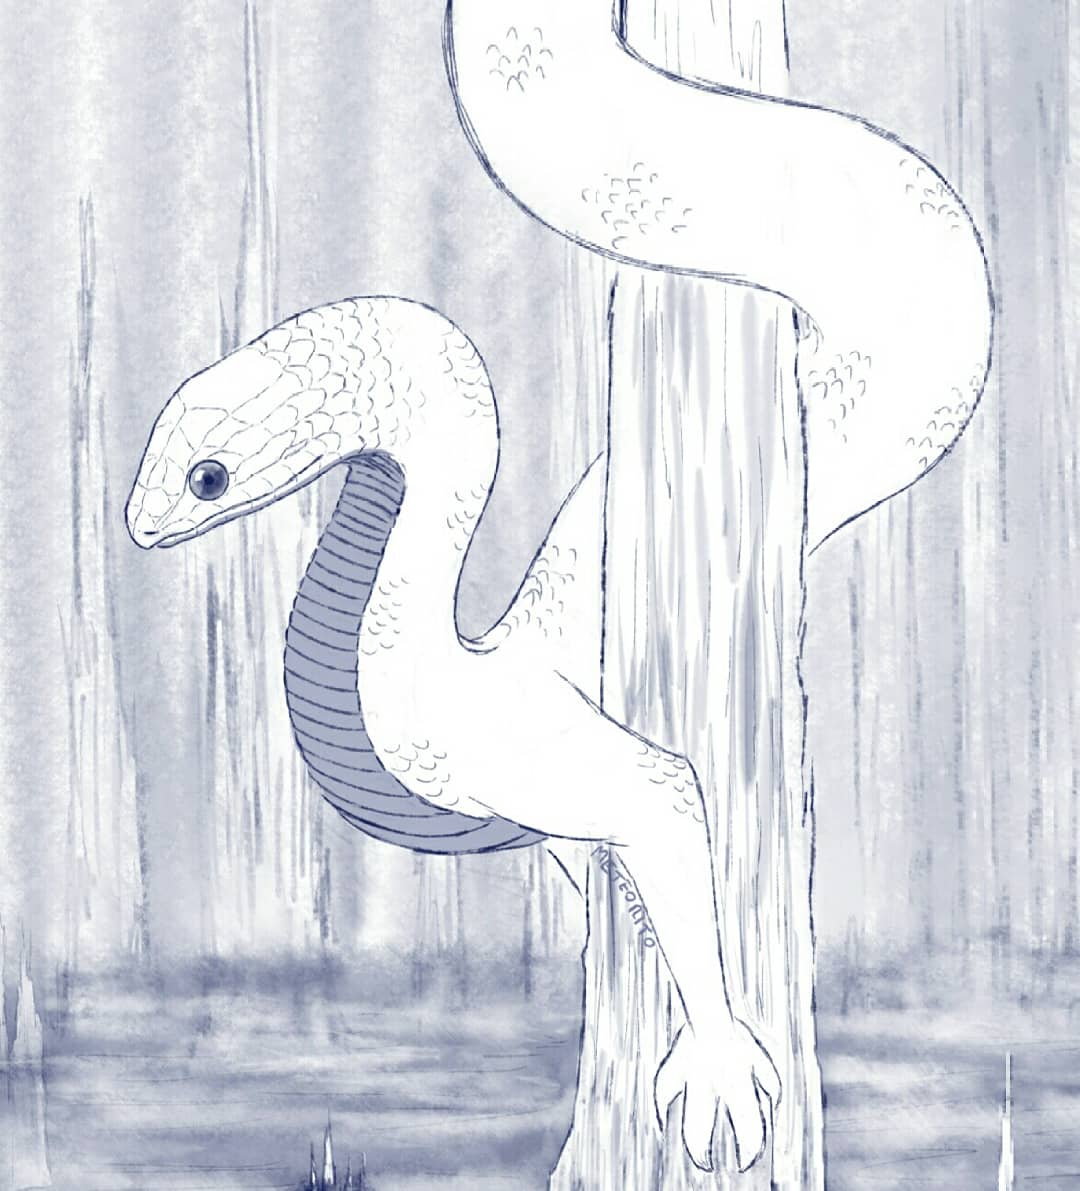 Starting the year with #creatuanary. Day 1 #swampdragon, inspired by the black swamp snake, let's see how many of these I do

#drawing #sketch #snake #dragon #swamp #blackswampsnake #nature #art #tumblrart #creatuanary2019